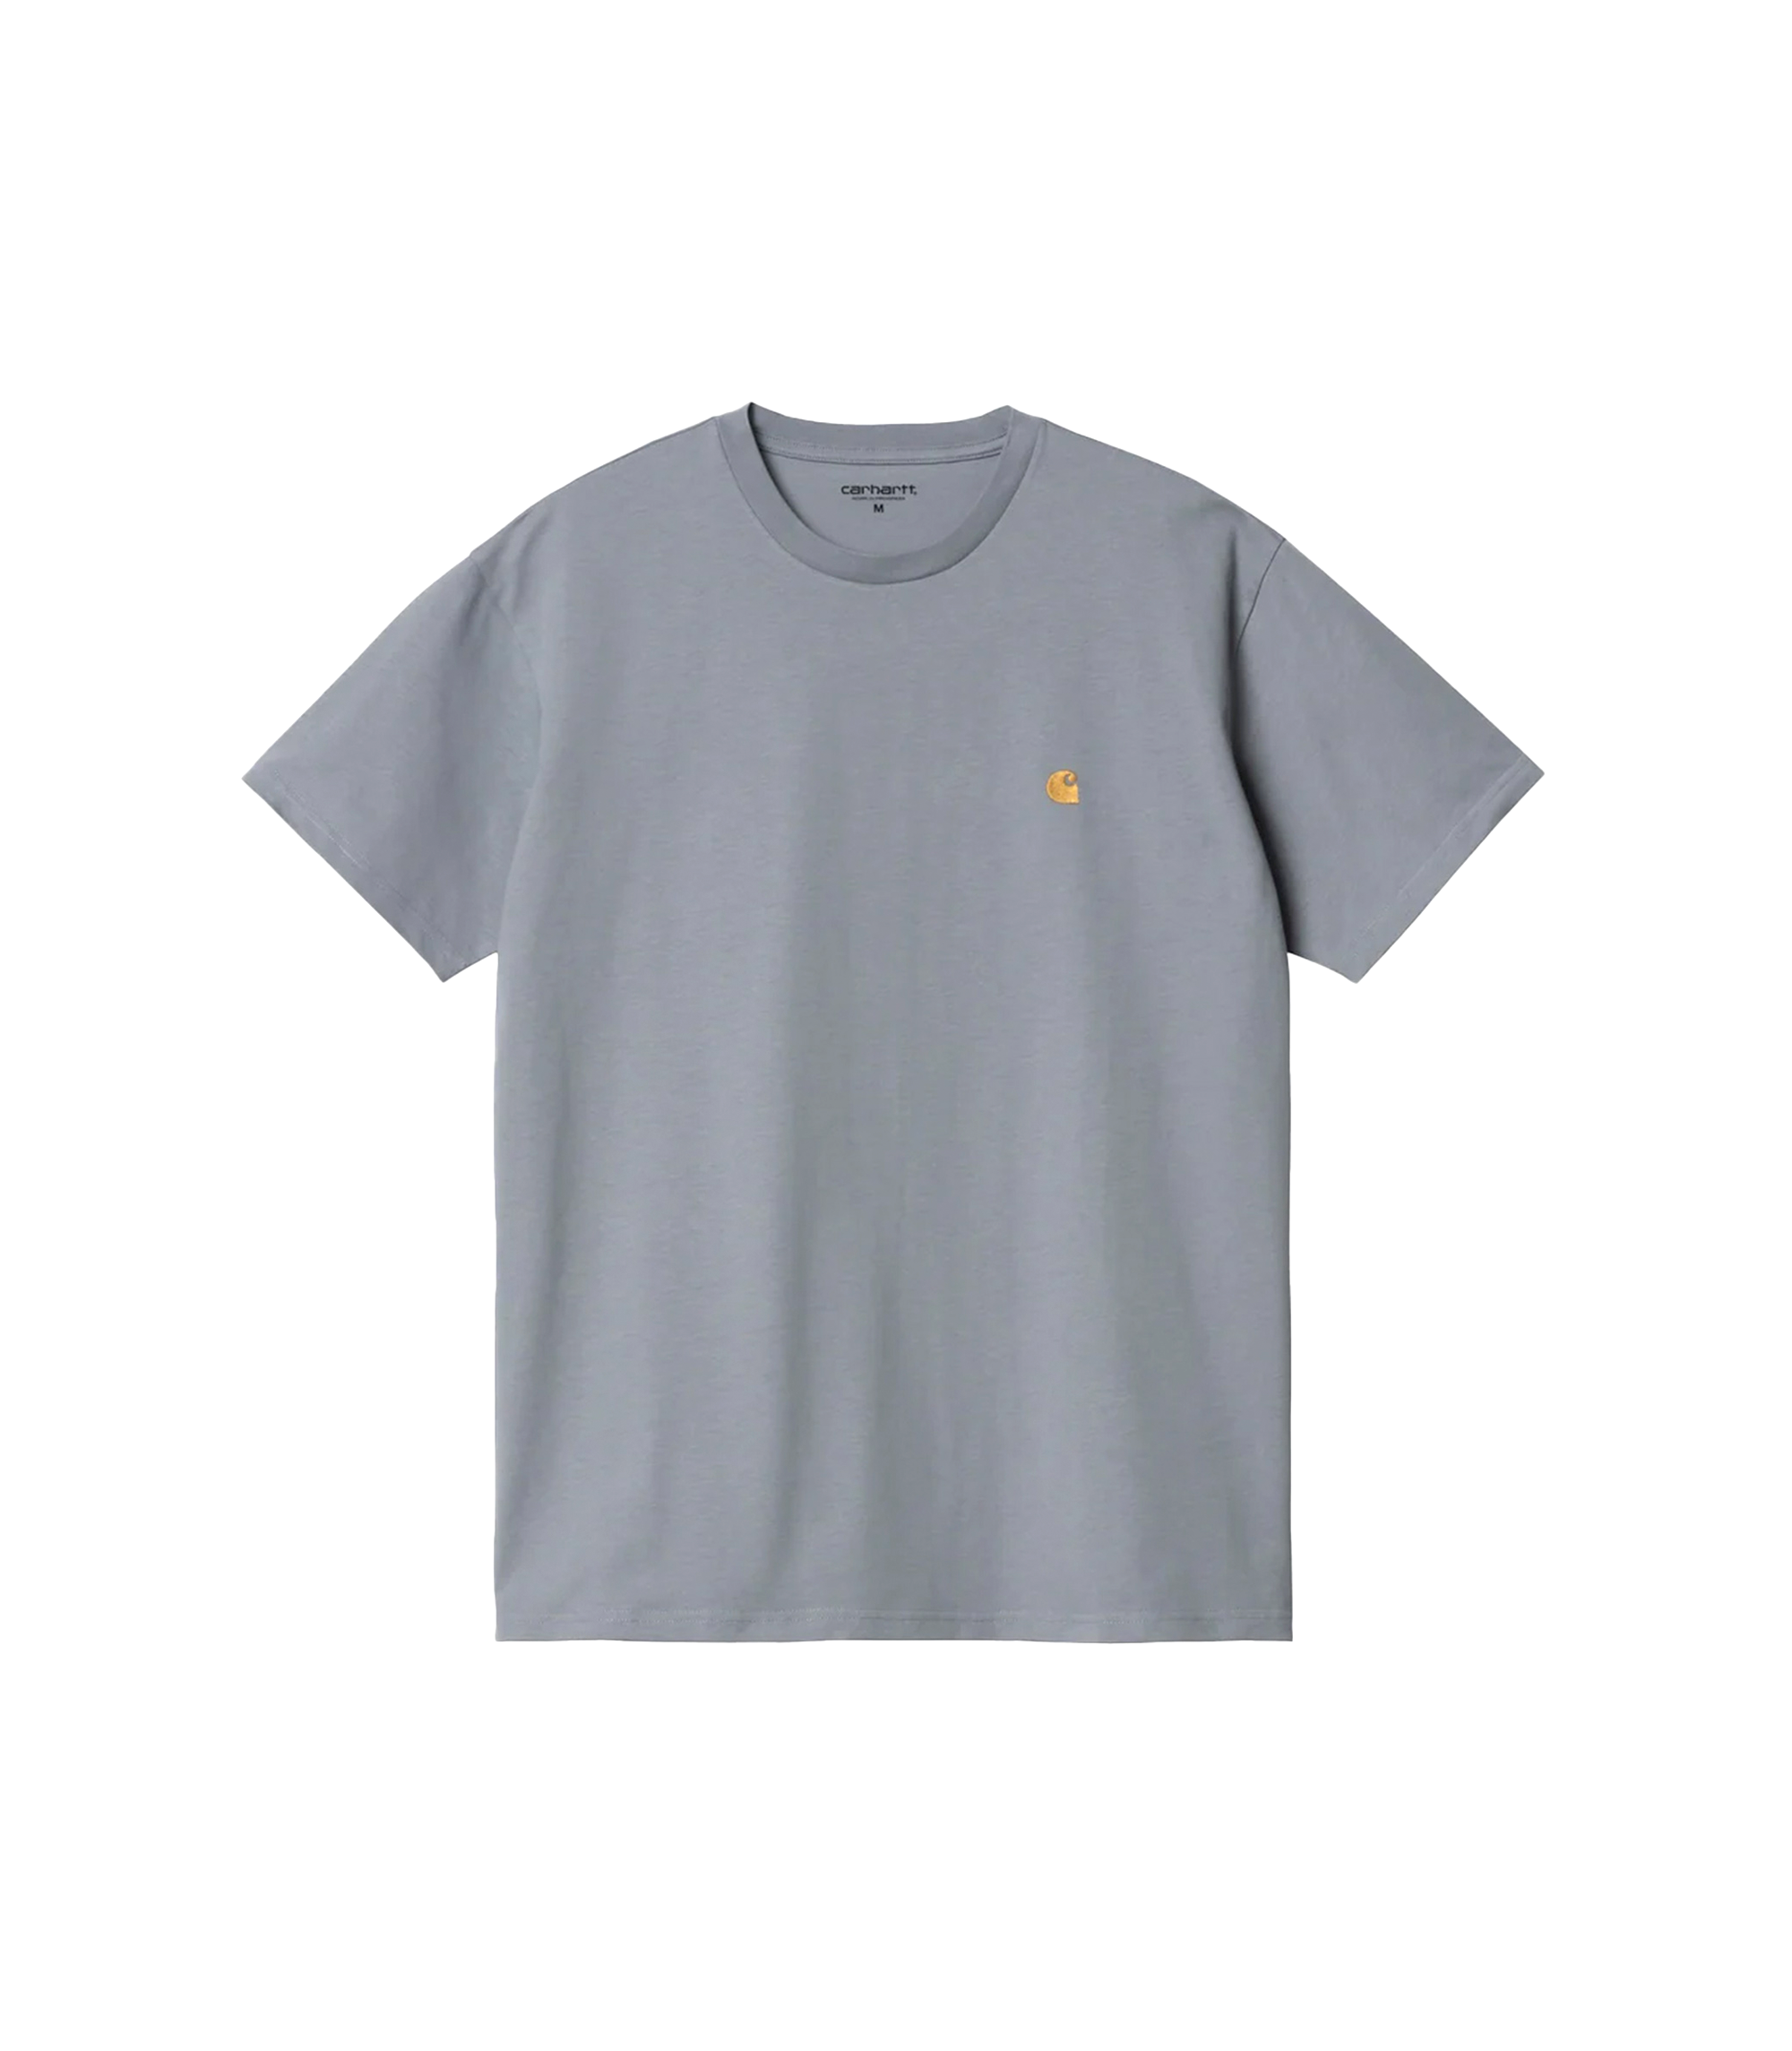 S/S Chase T-Shirt - Mirror / Gold